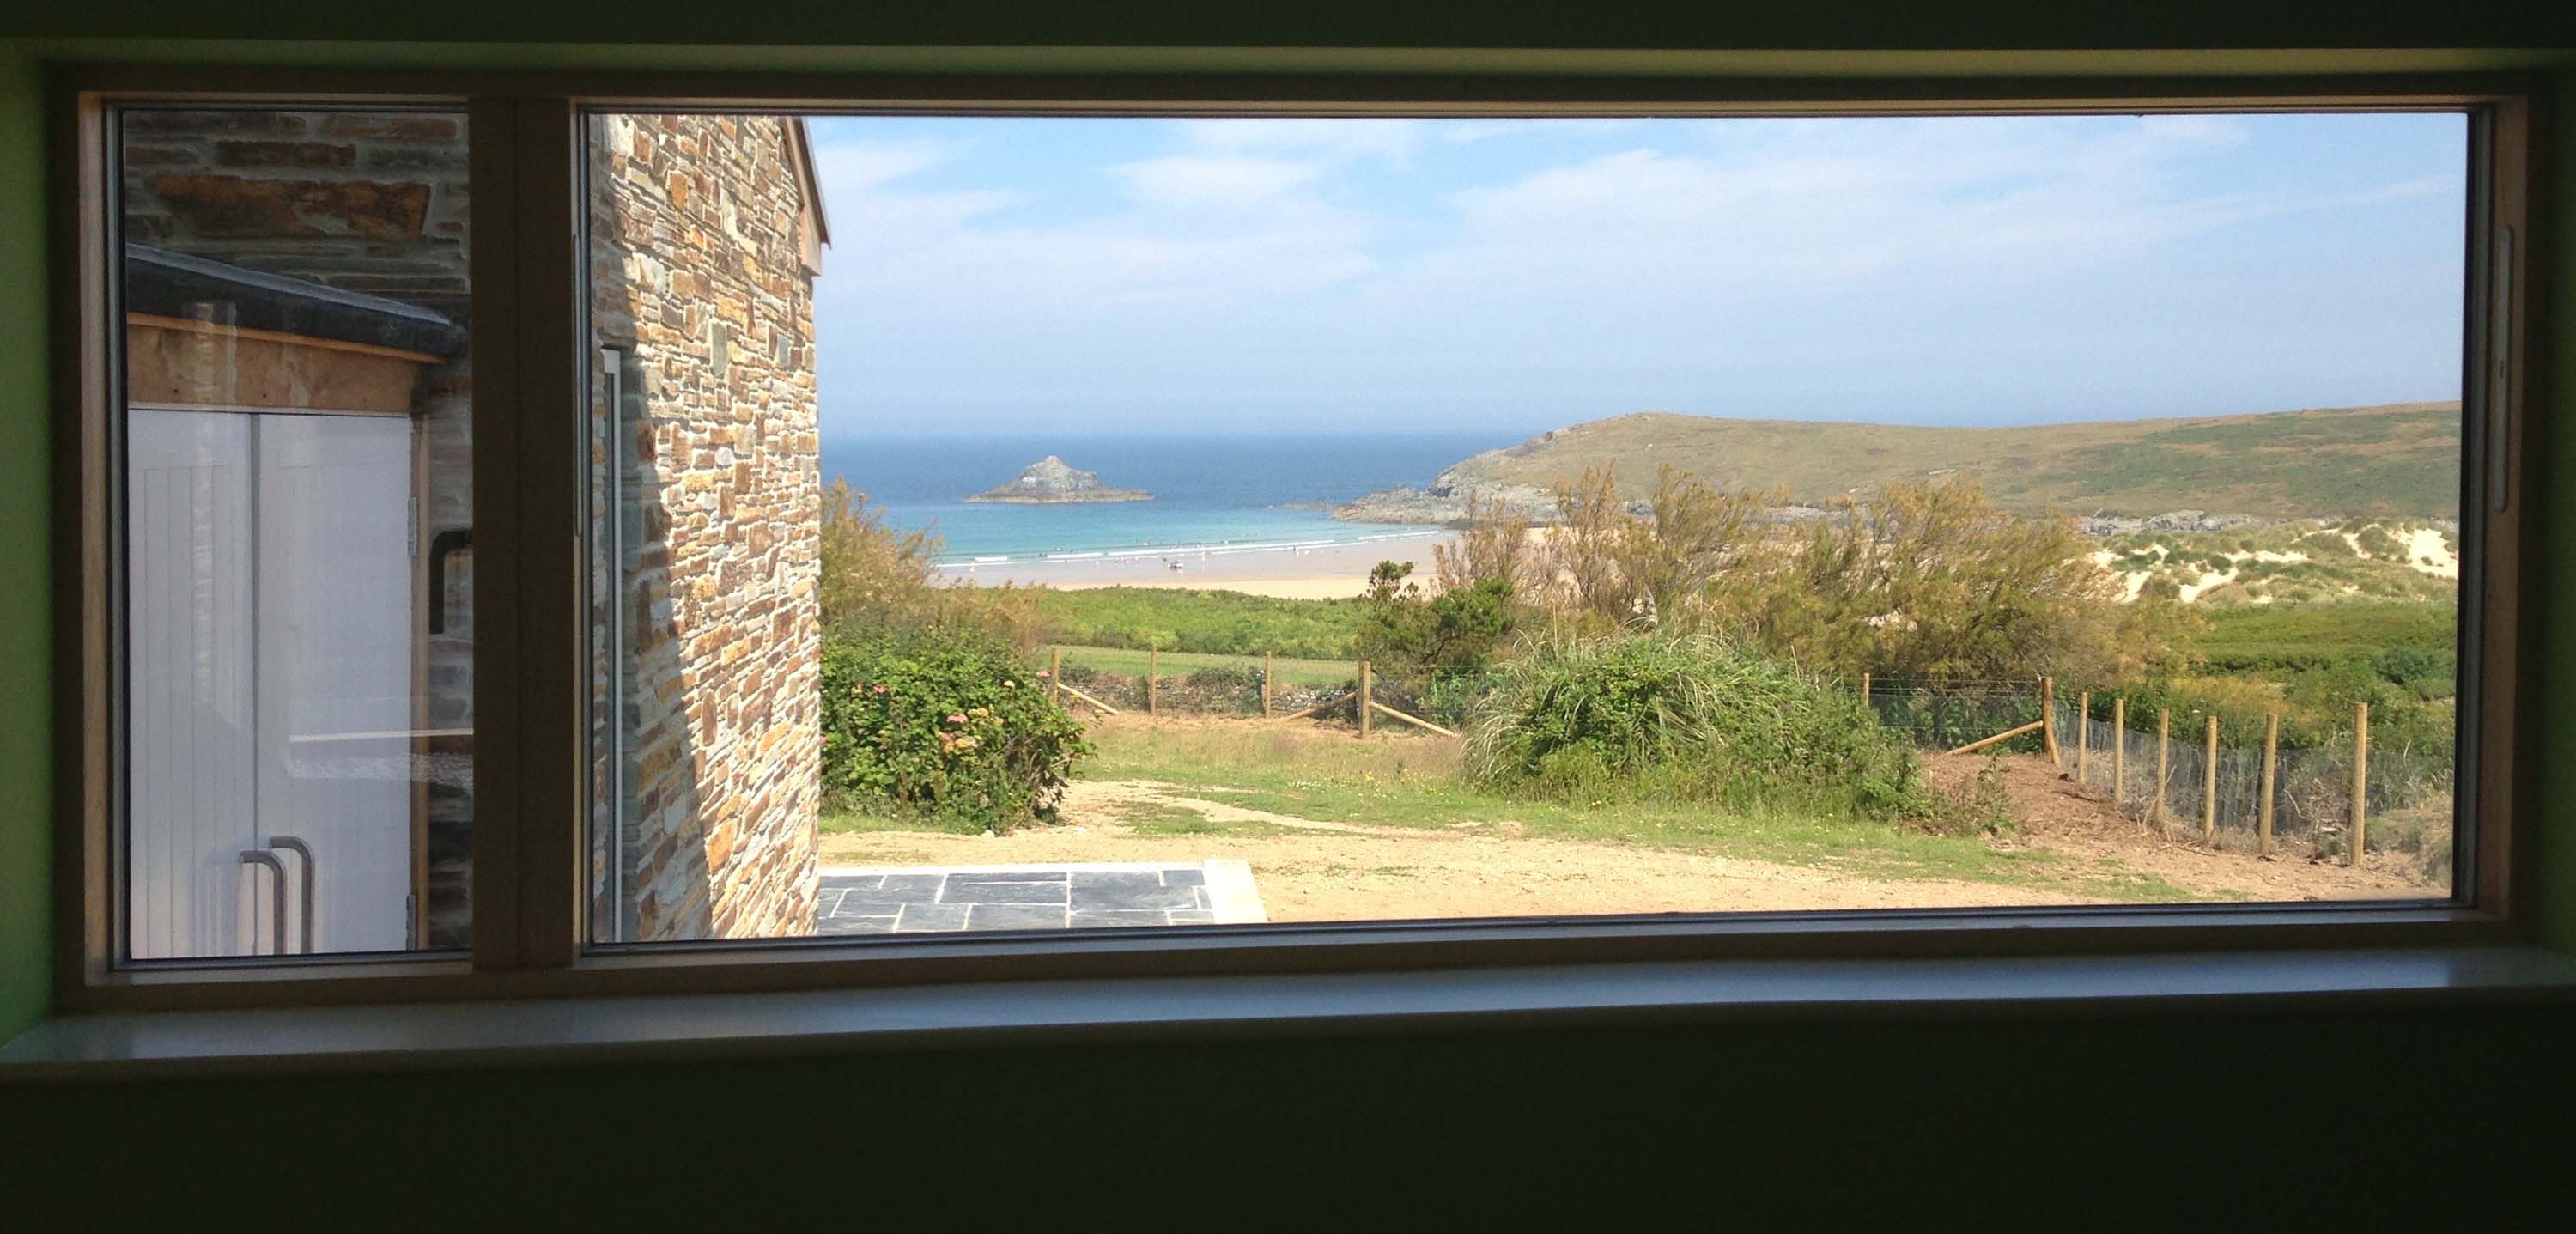 Crantock Beach: Remodelling a seaside family home.